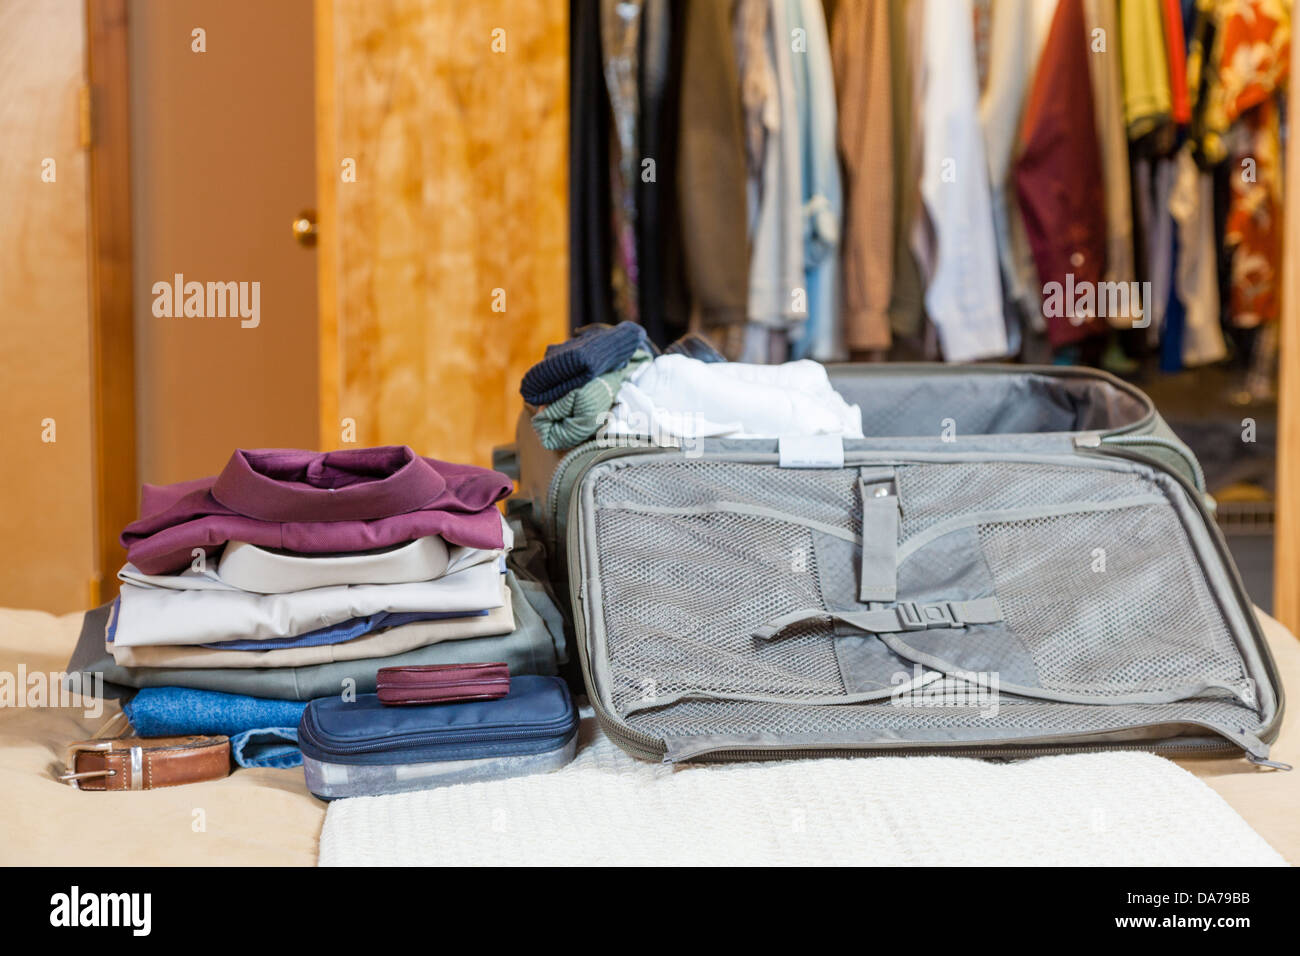 Packing Clothes into Travel Bag Stock Photo - Image of elegant, indoor:  95143614